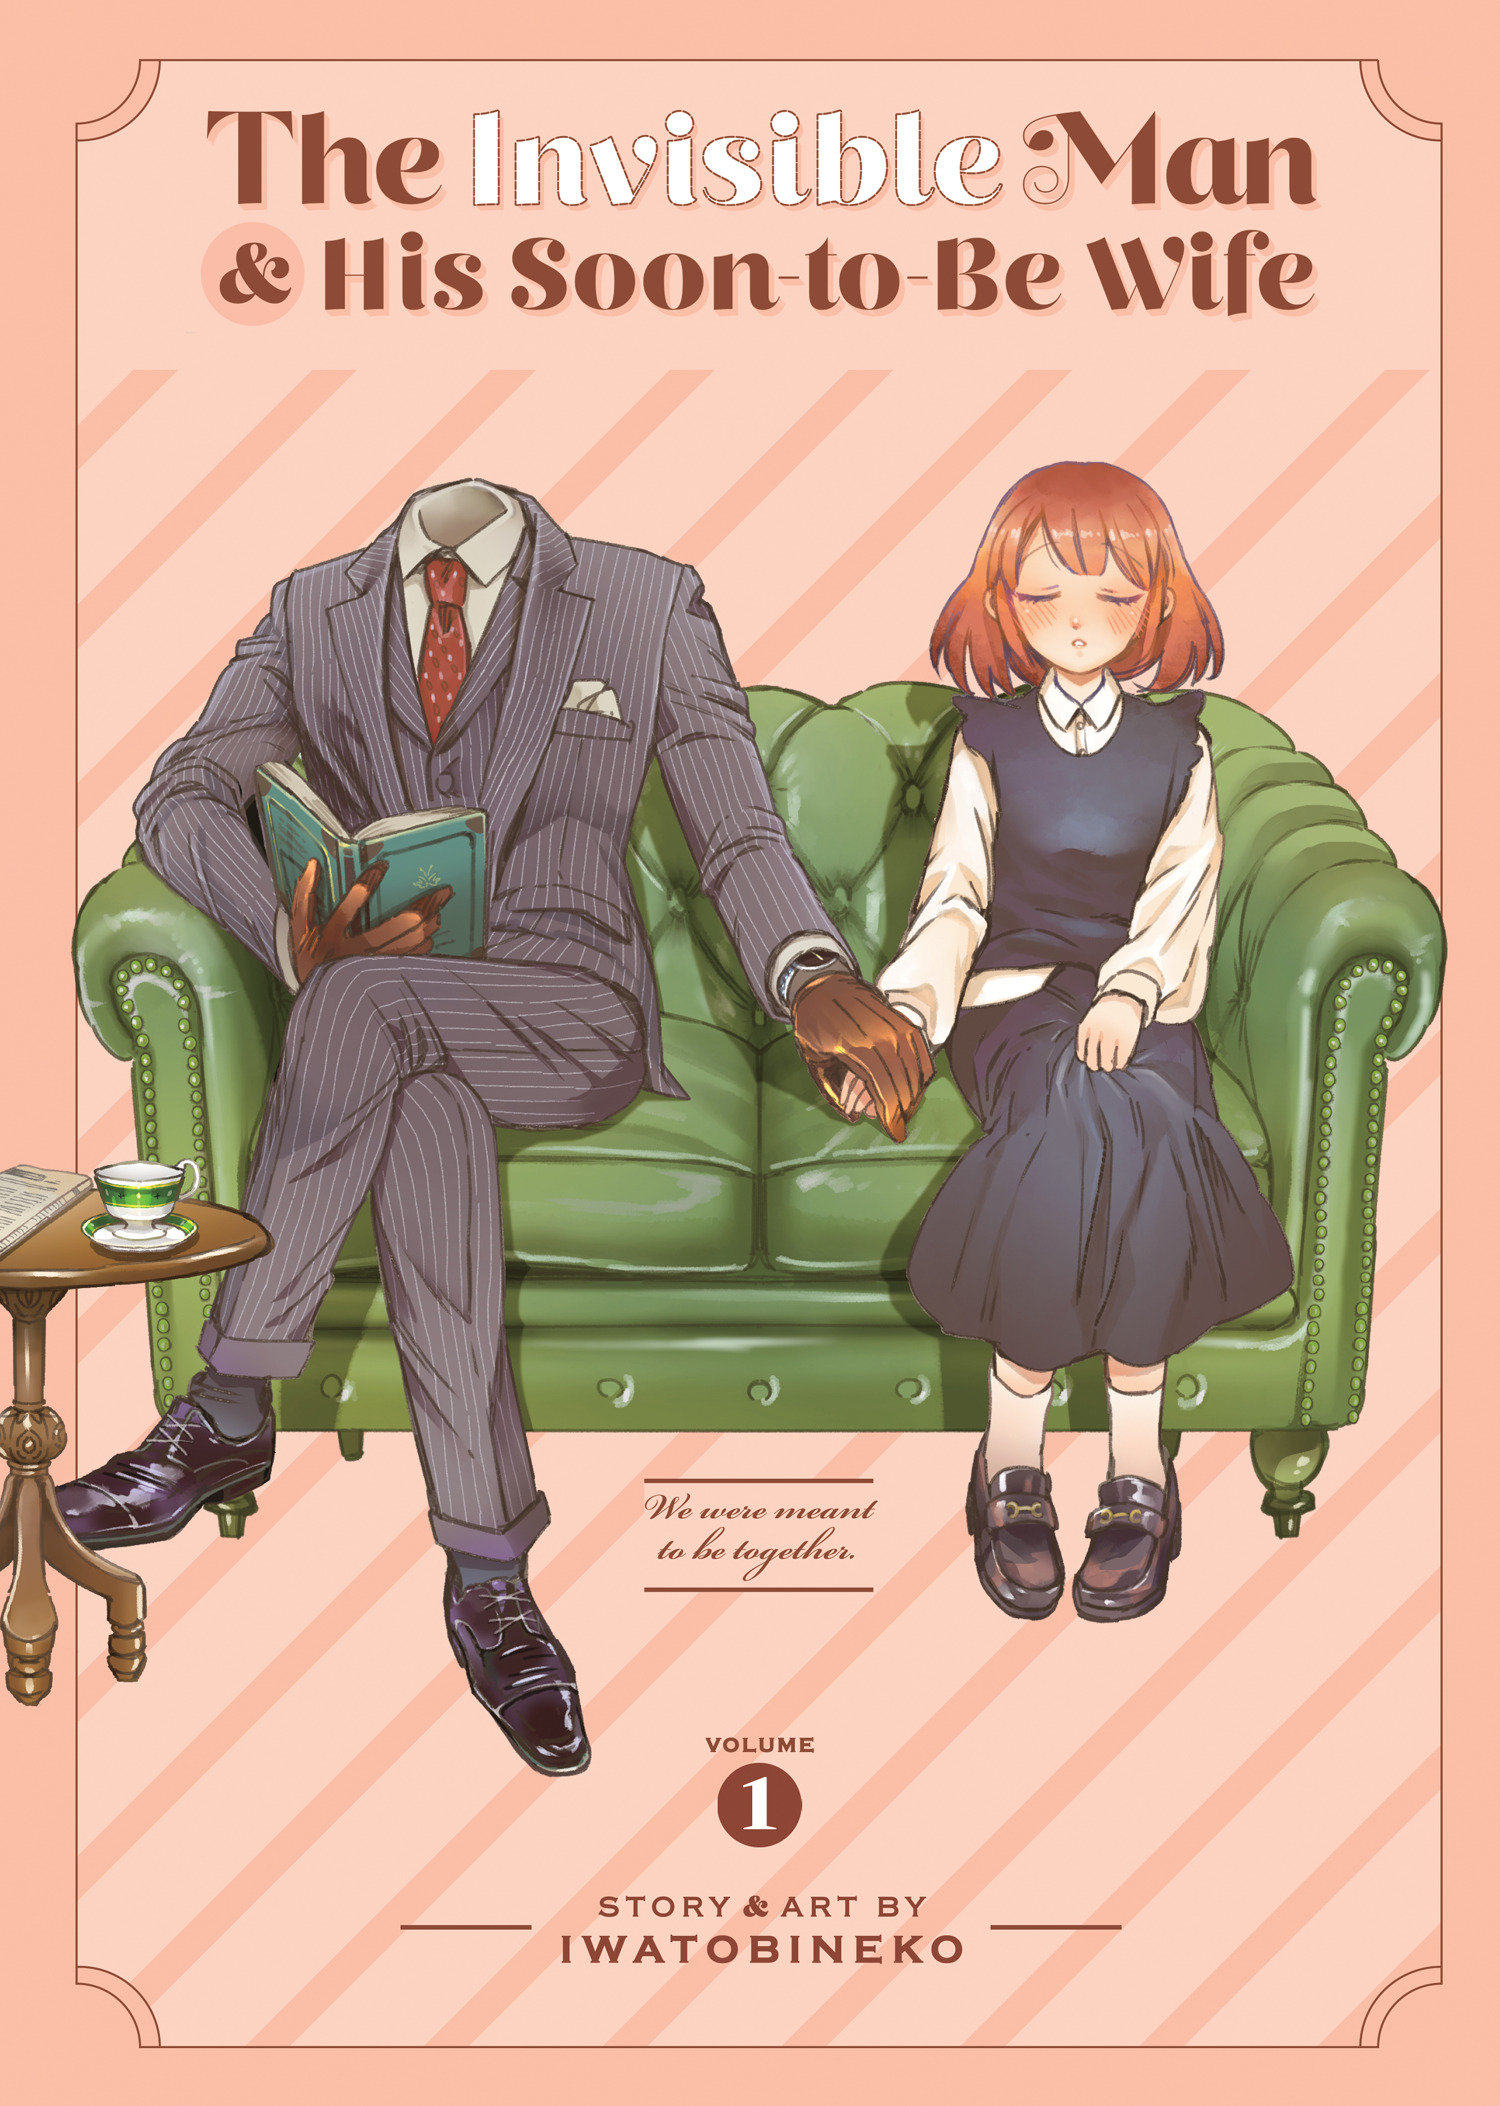 The Invisible Man & Soon-to-Be Wife Manga Volume 1